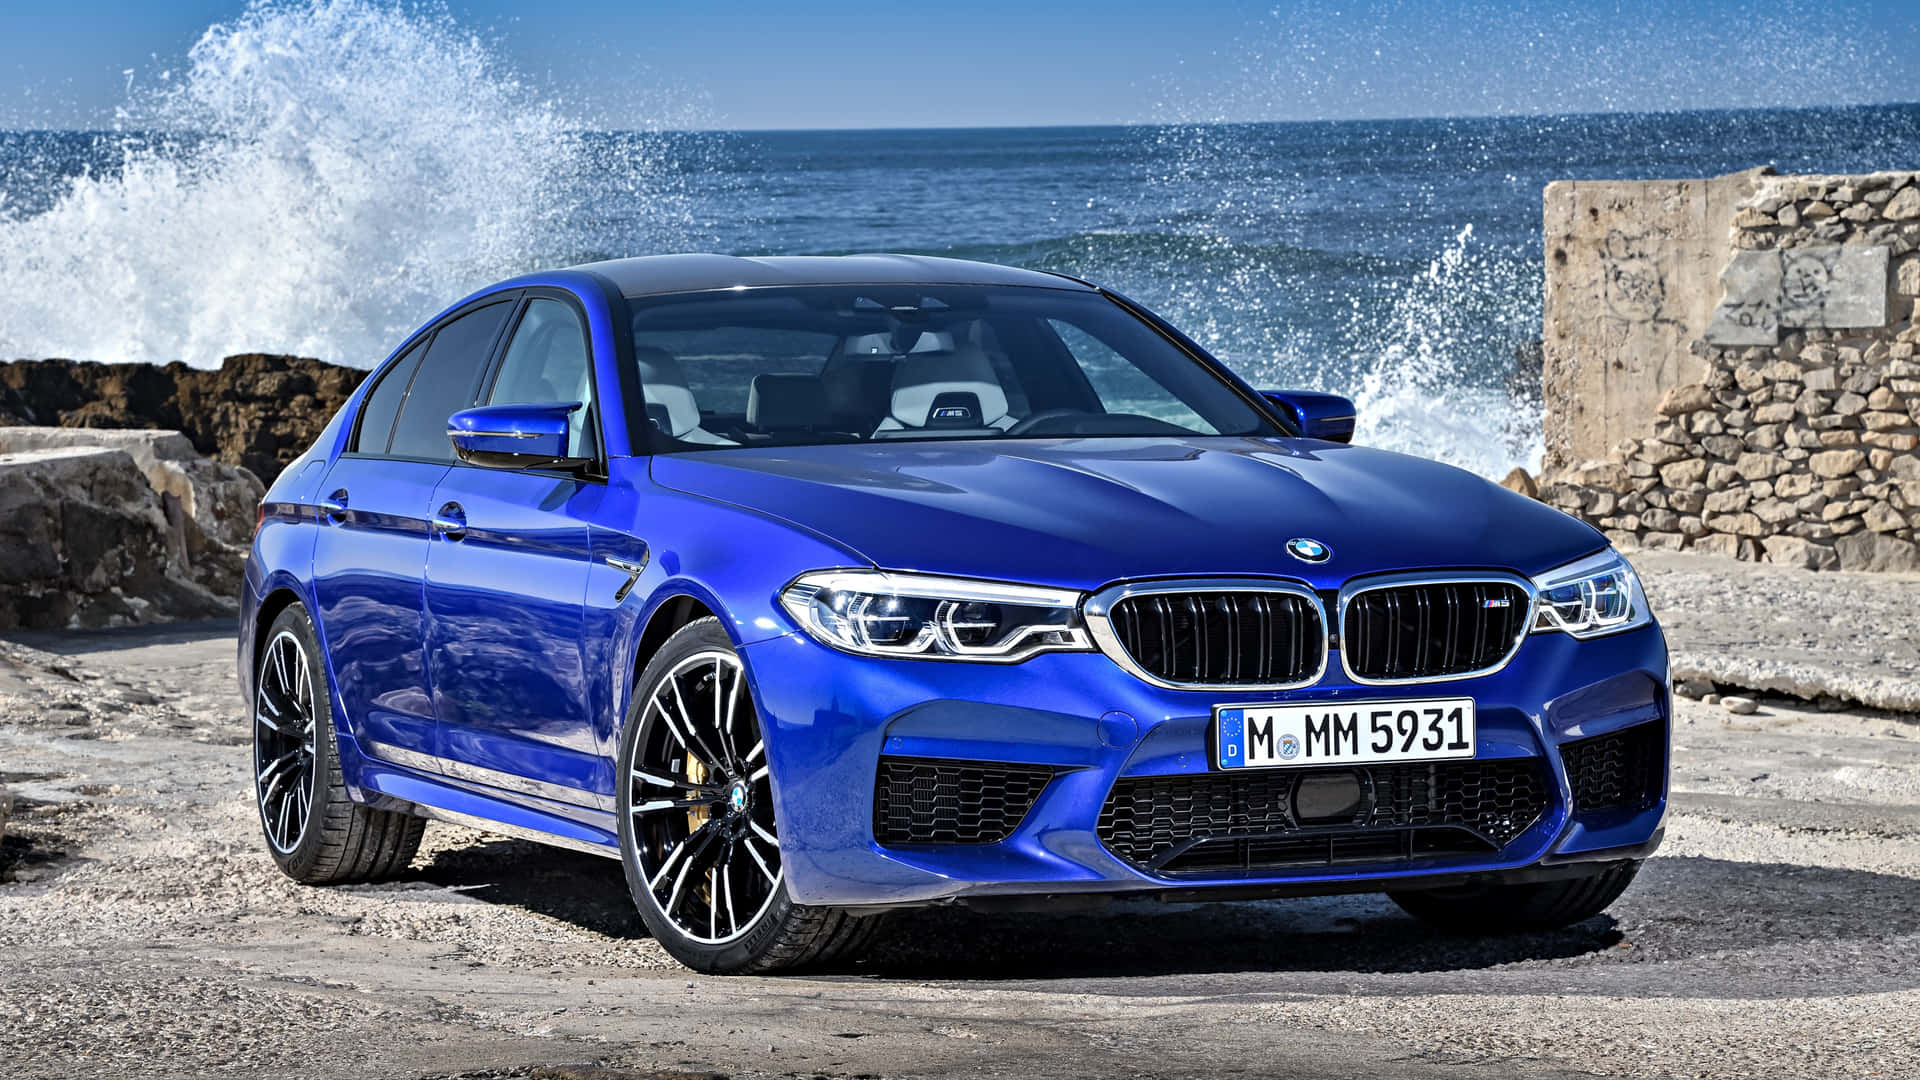 Experience the Luxury of Driving the BMW M5 Wallpaper